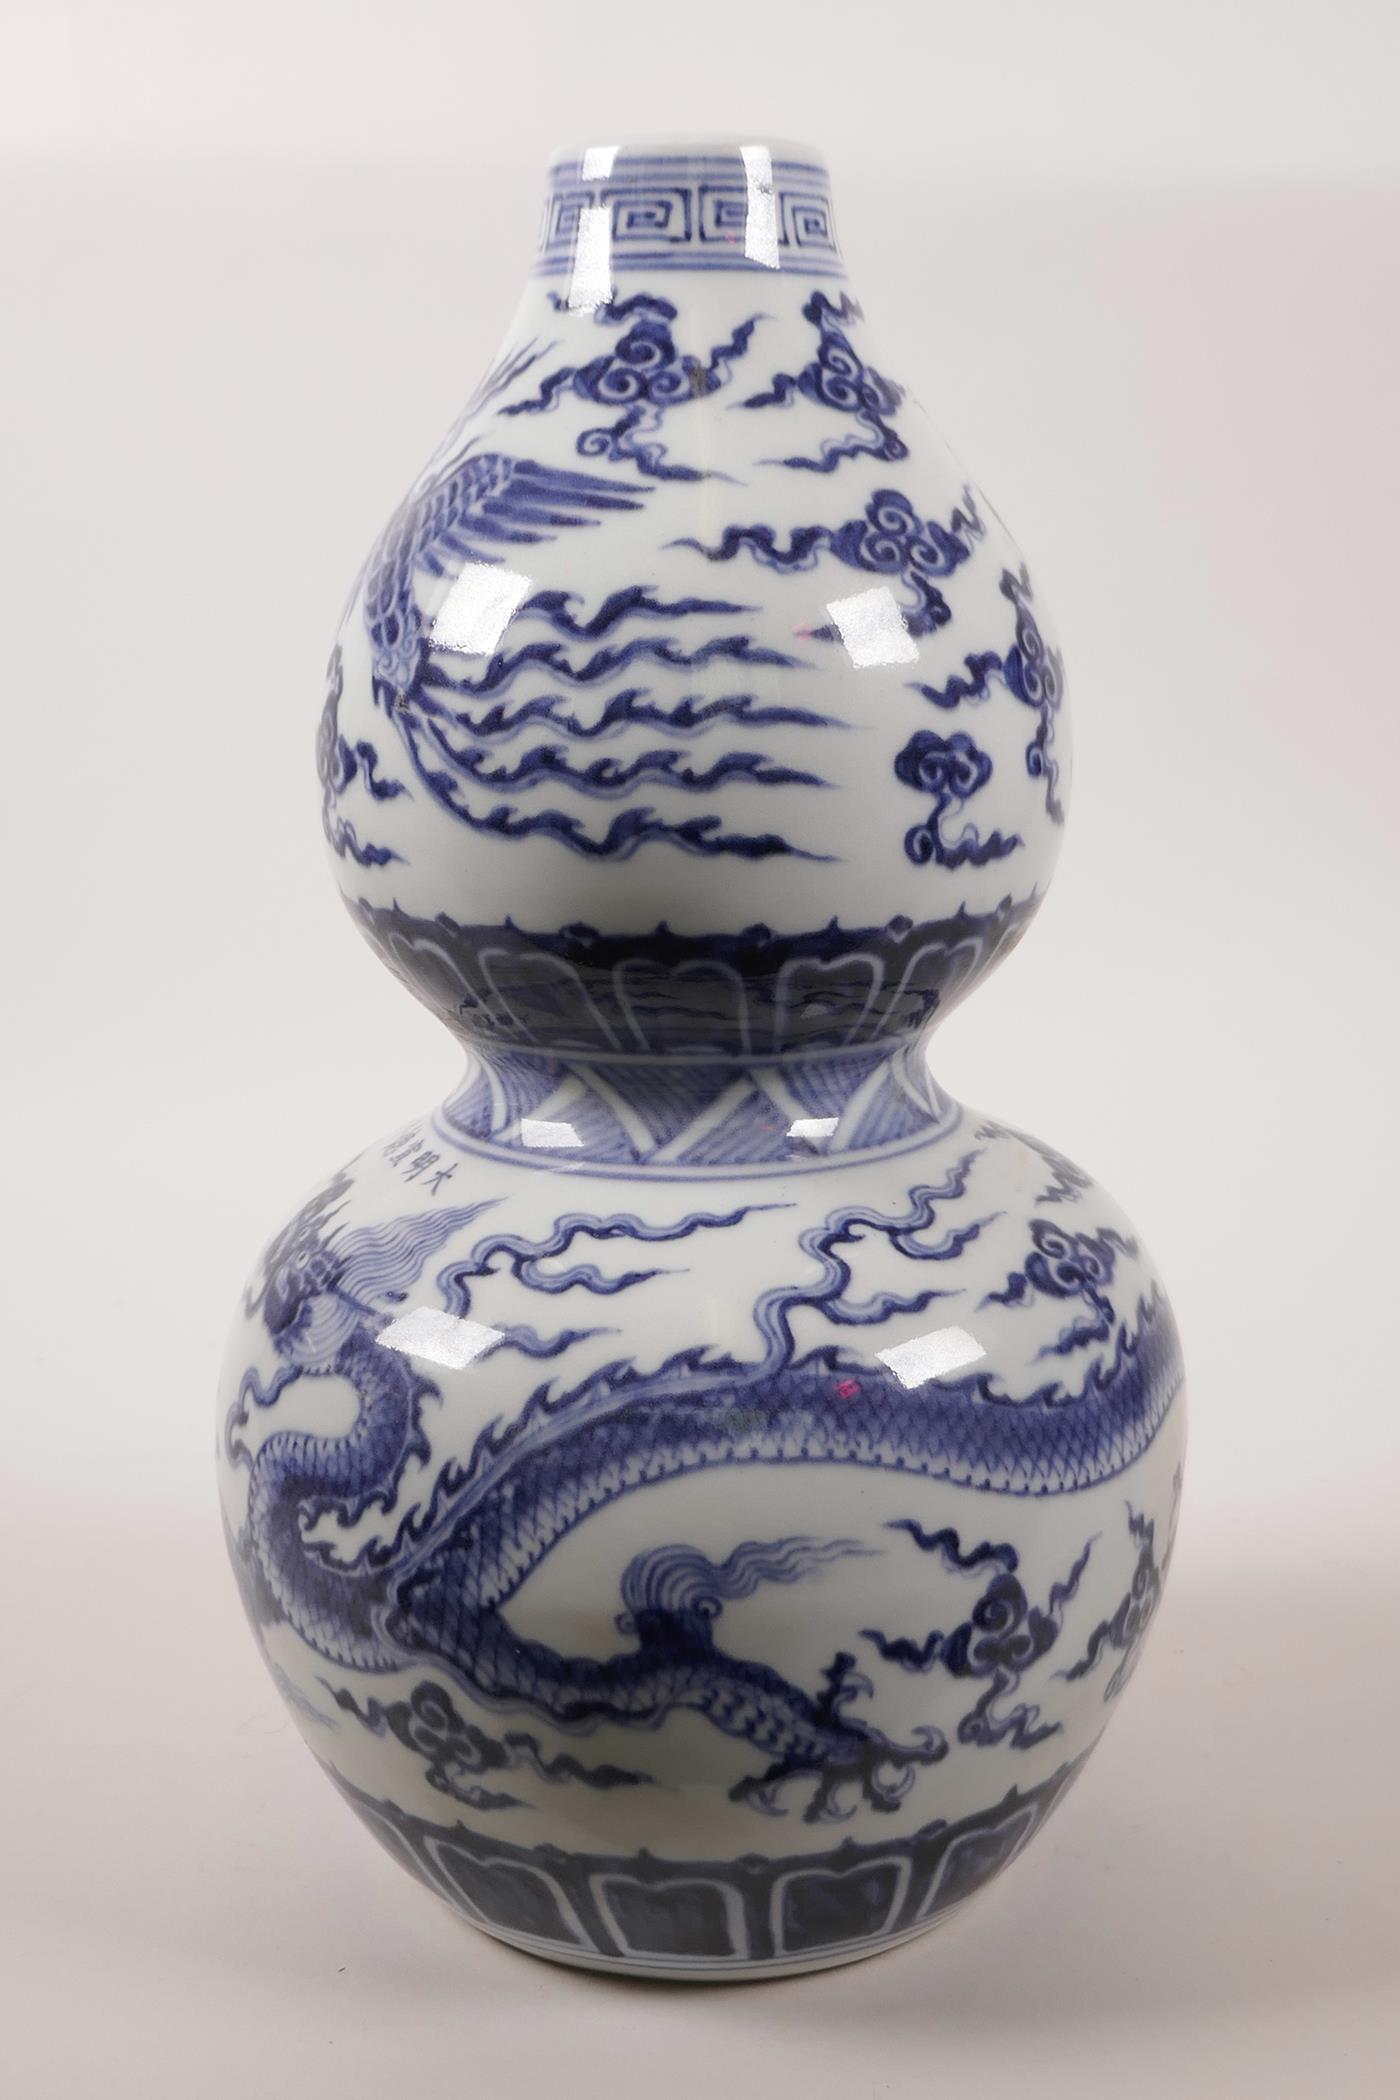 A Chinese double gourd pottery vase decorated with a dragon and phoenix in flight, 6 character - Image 2 of 6